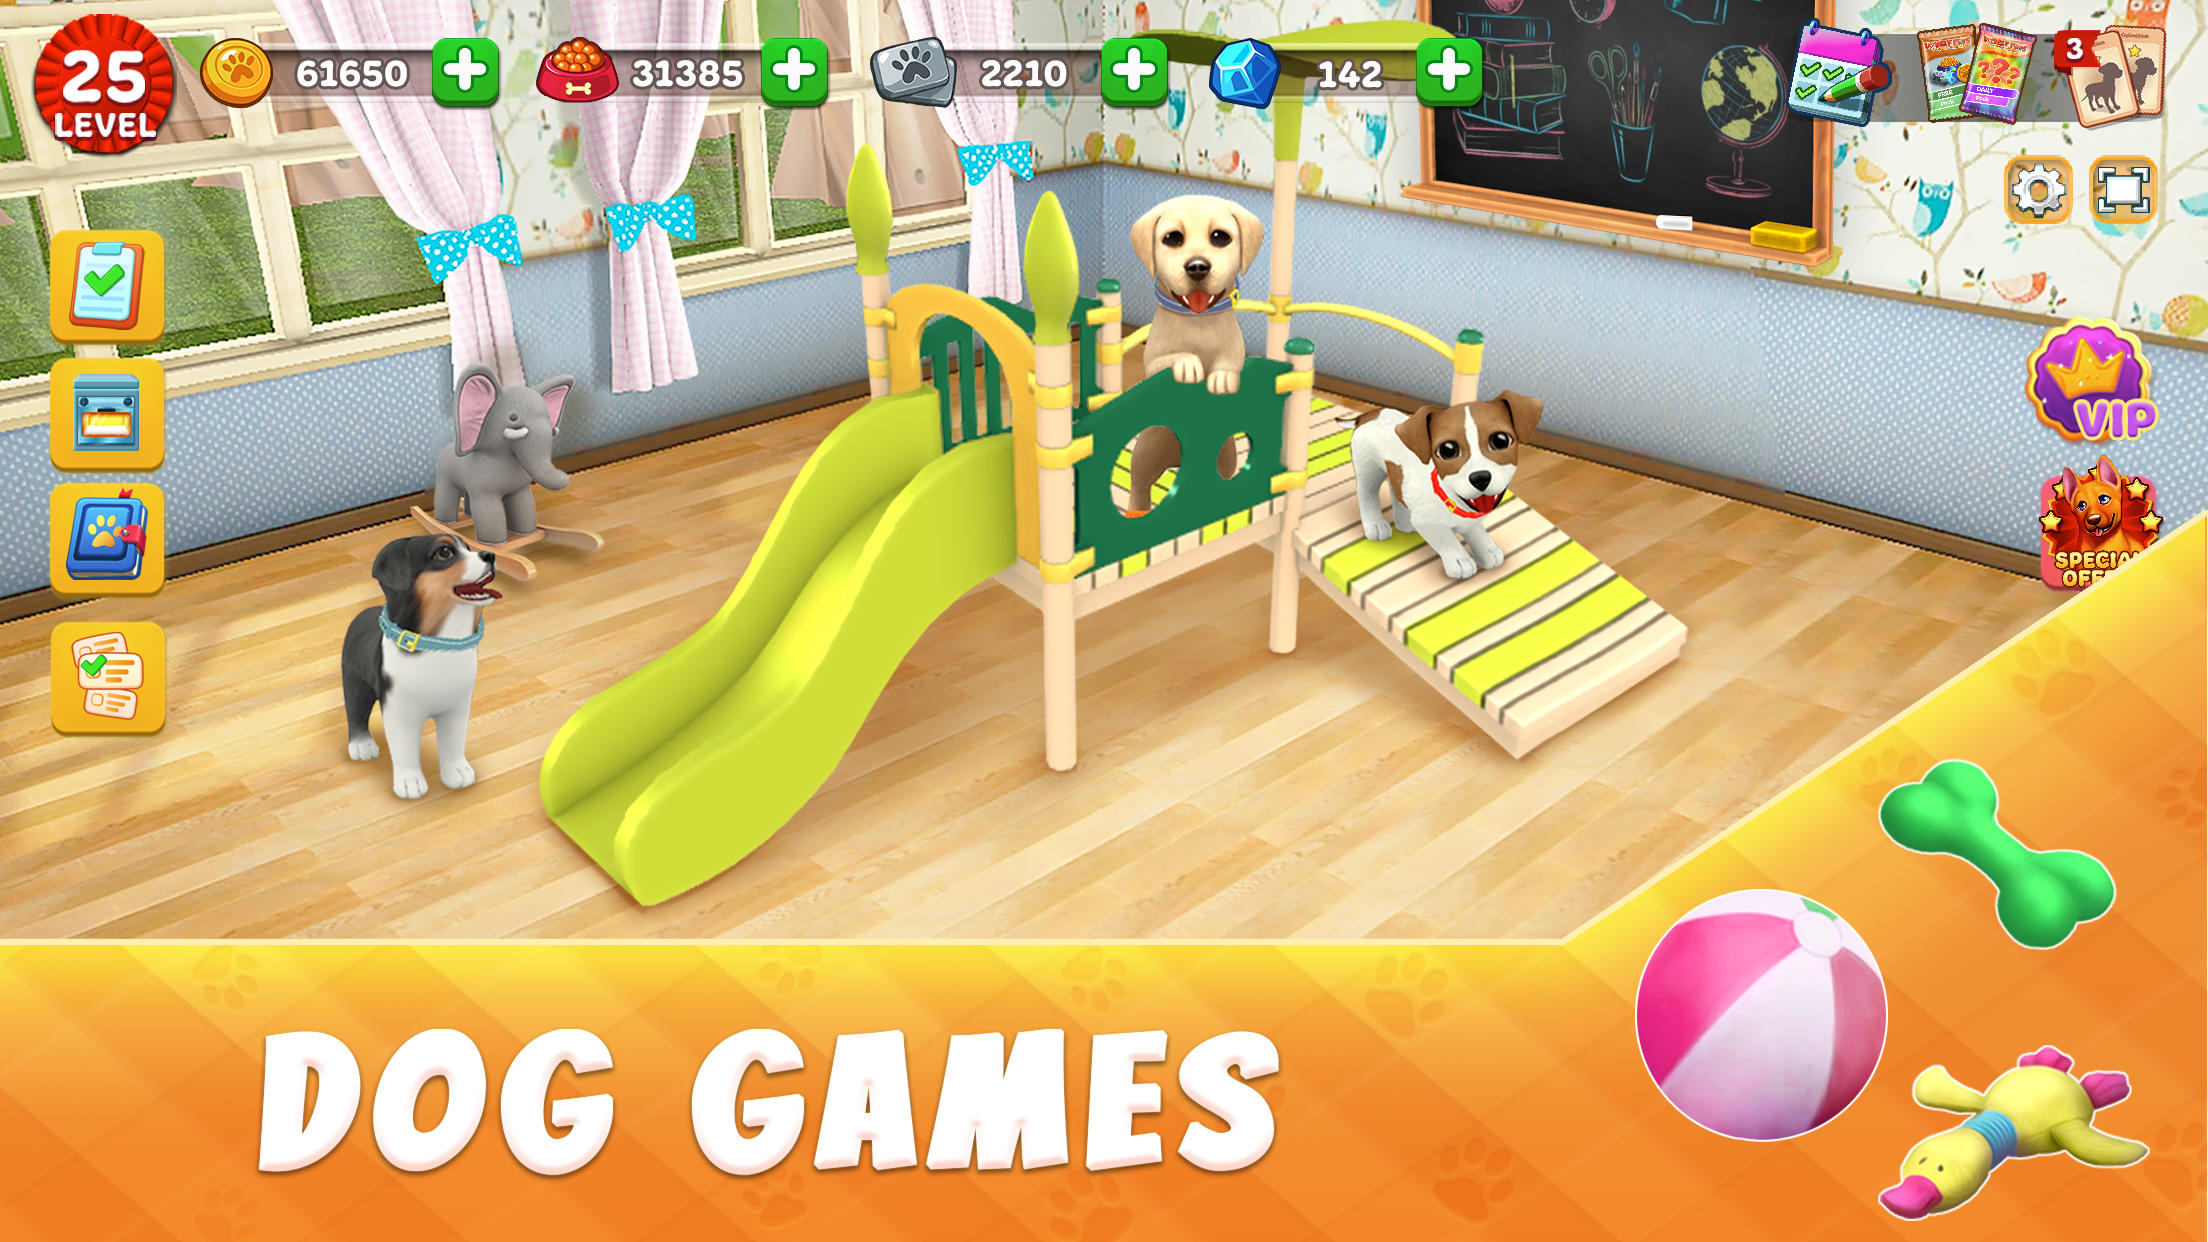 Dog Town: Pet Shop Game, Care & Play with Dogのキャプチャ